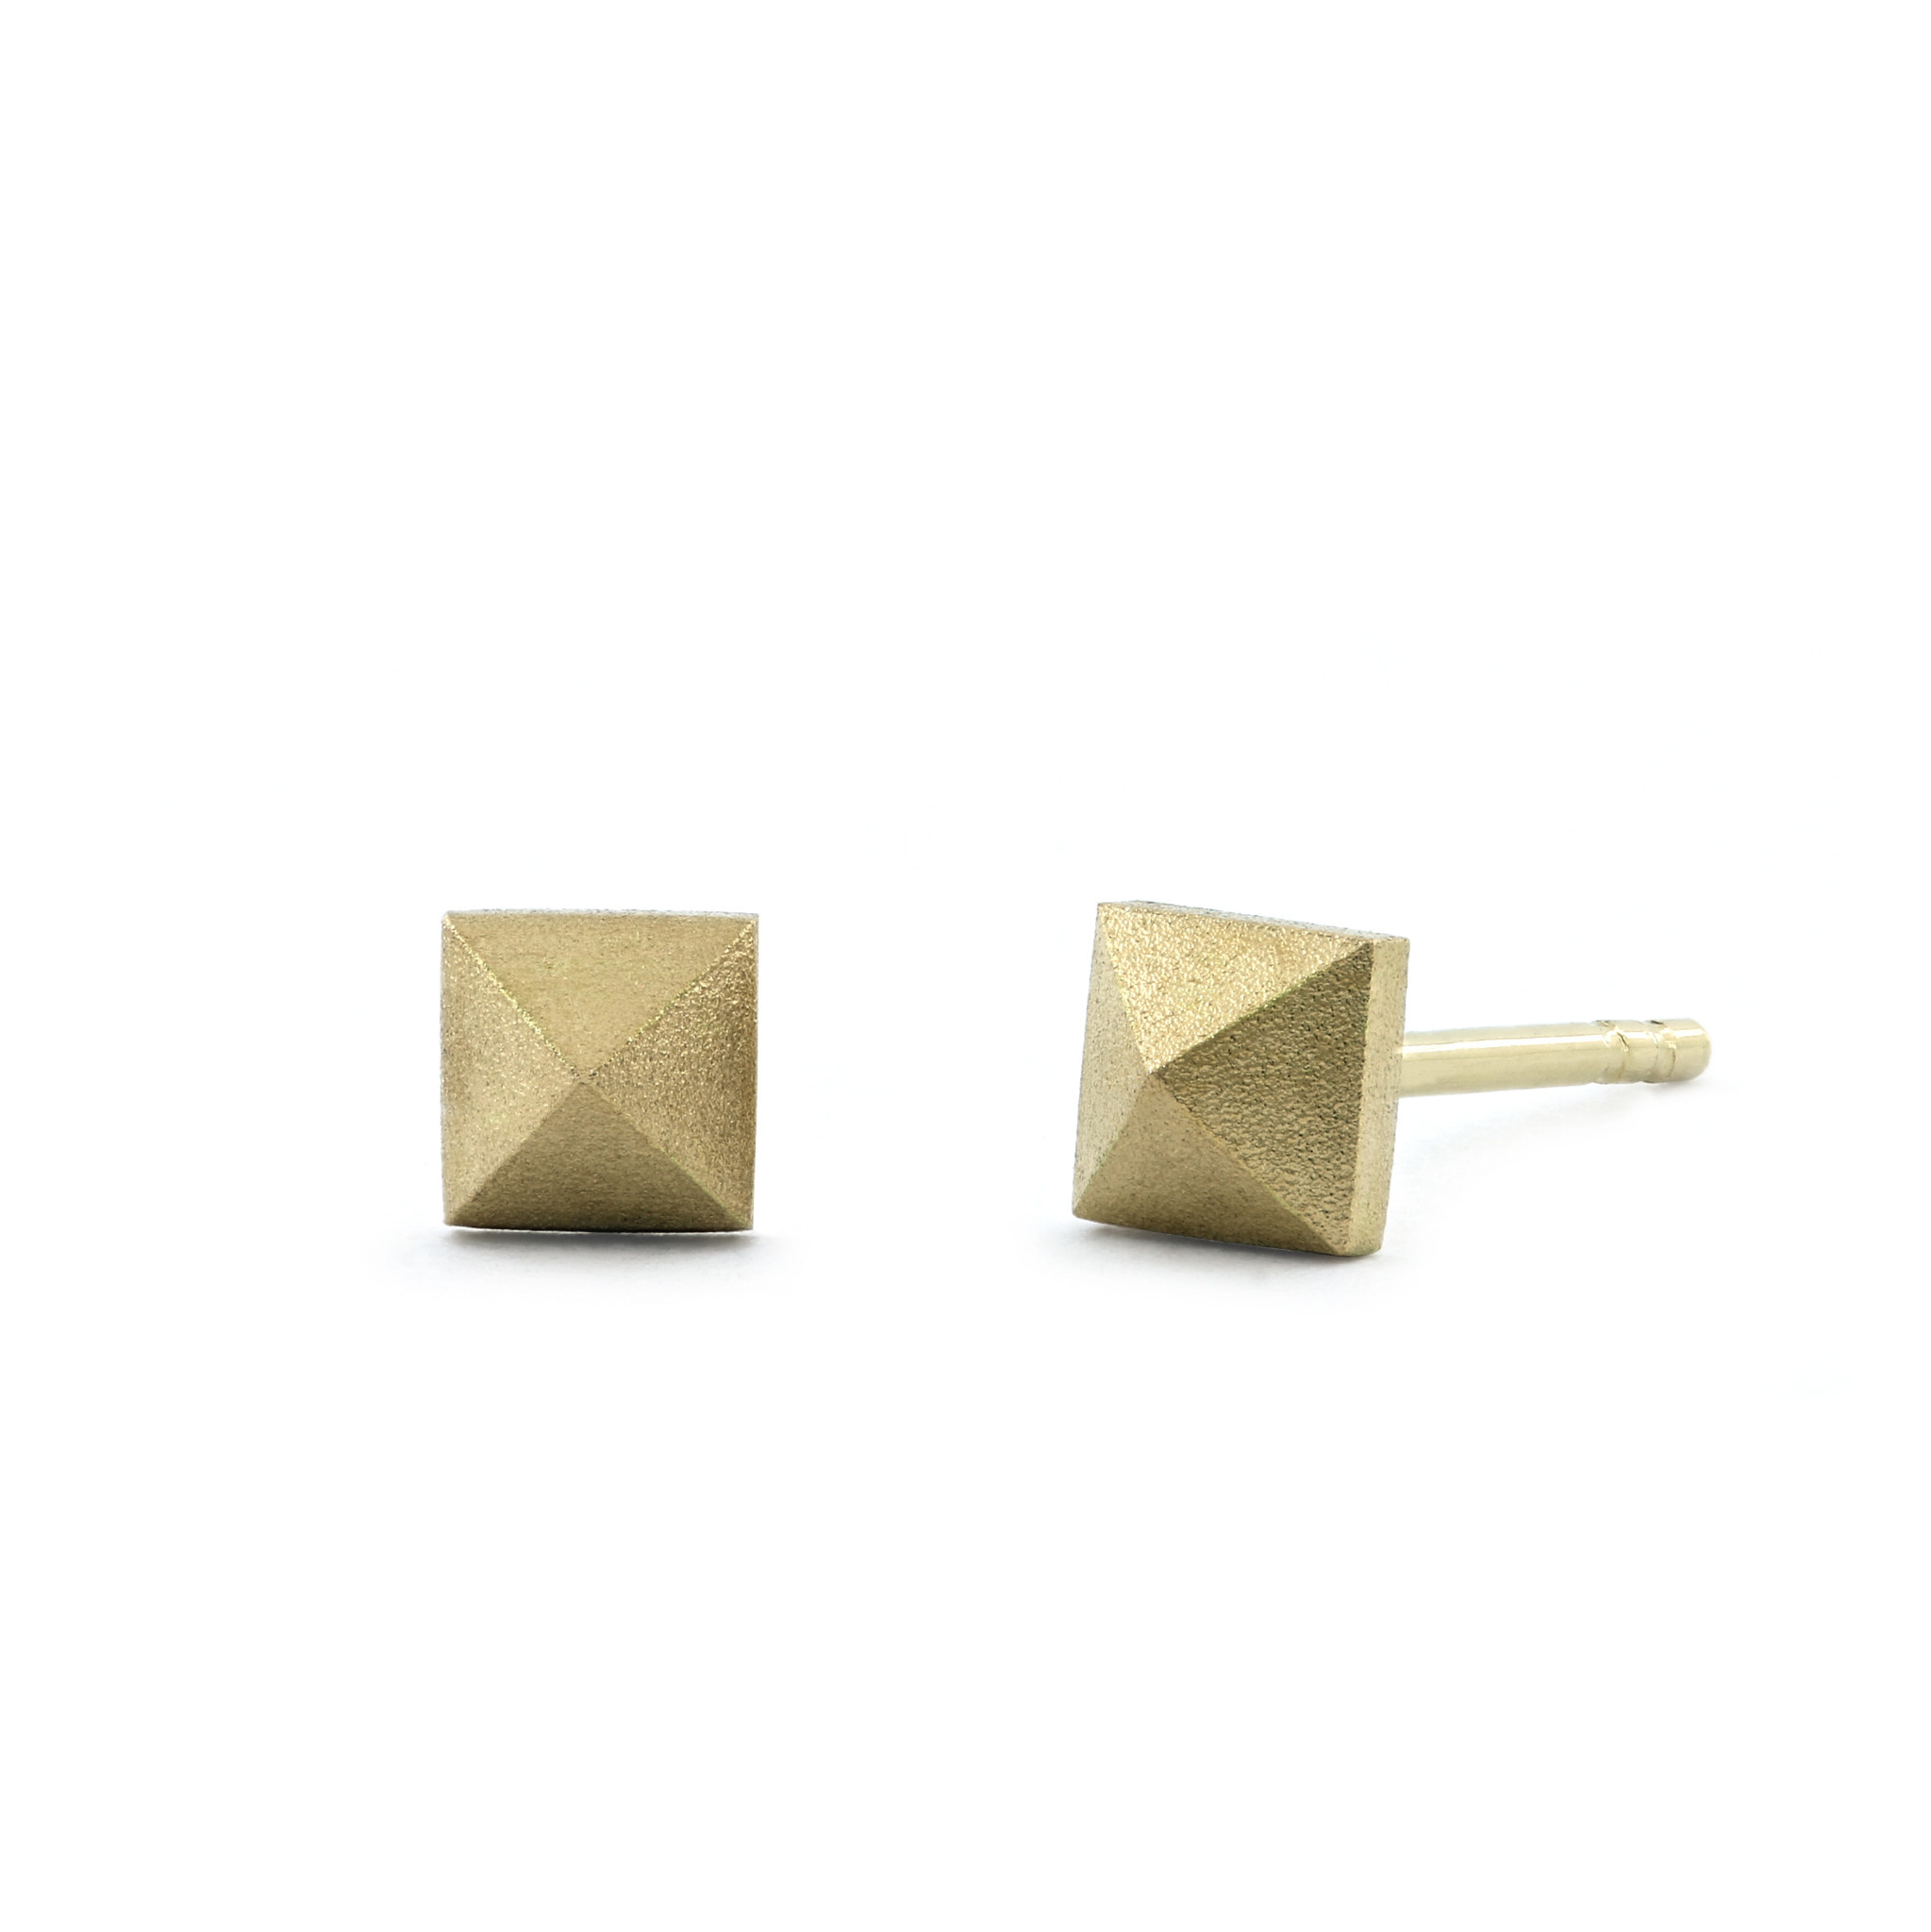 Metal Studs,50/100 Bright Yellow Square Metal Pyramid Studs for